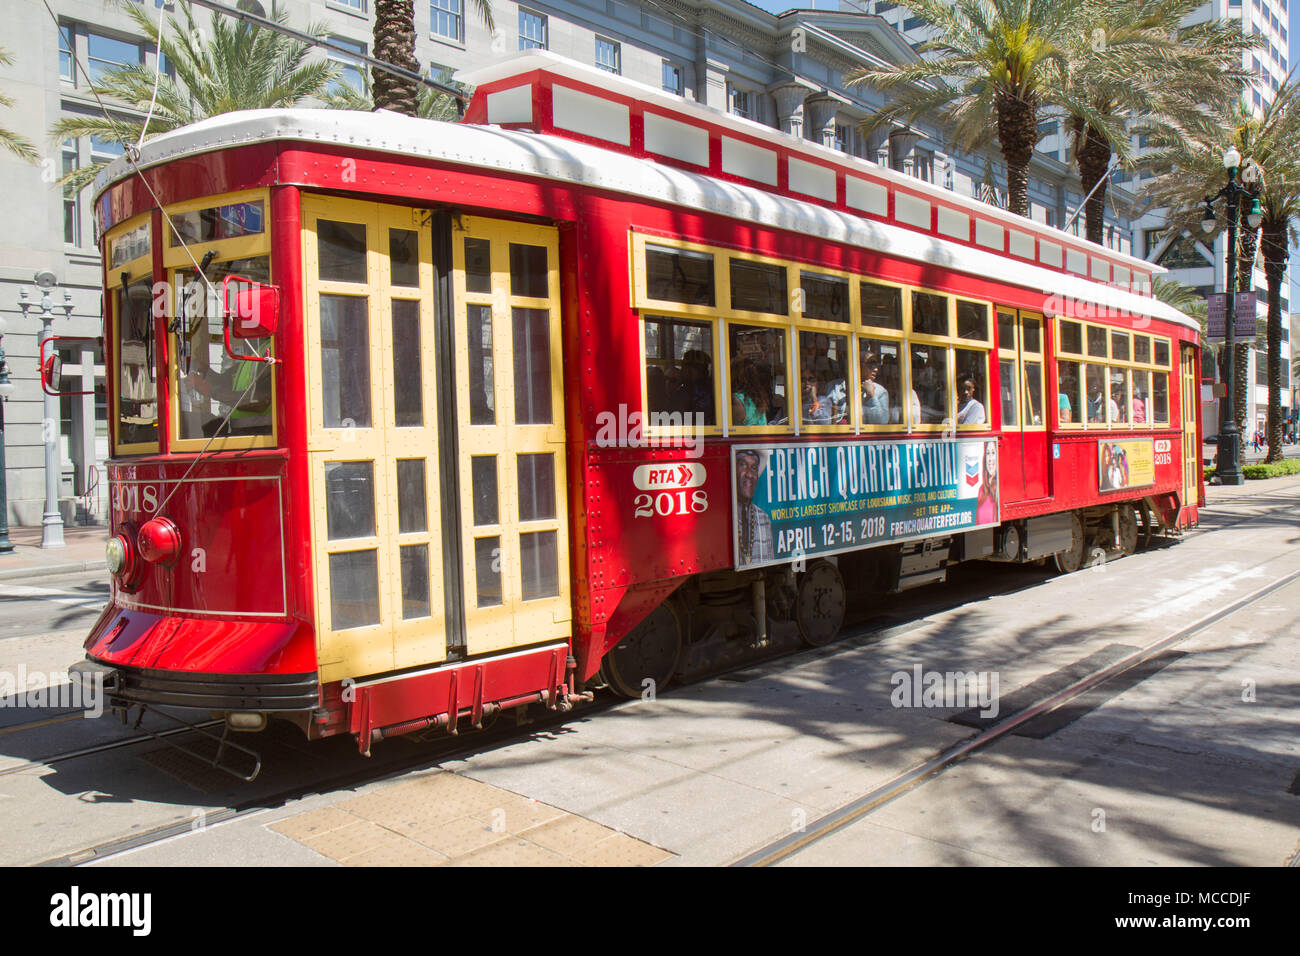 New Orleans Canal Street Streetcar. Color landscape image of red and yellow streetcar passing down Canal Street in New Orleans, Louisiana. Stock Photo